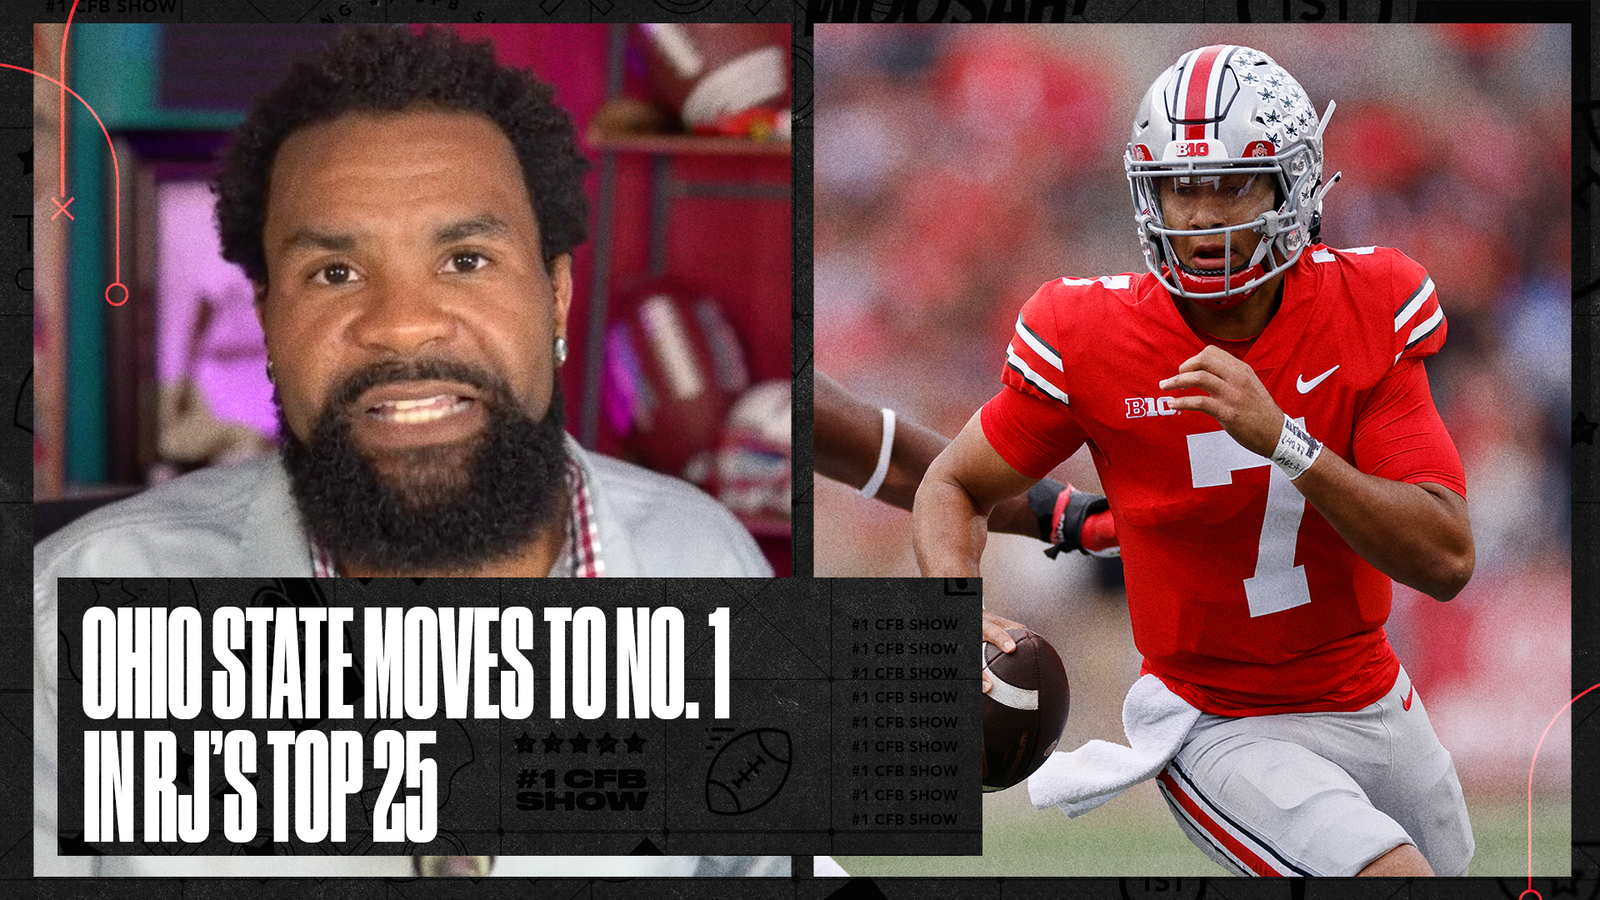 RJ Young's Top 25: Ohio State moves up to No. 1